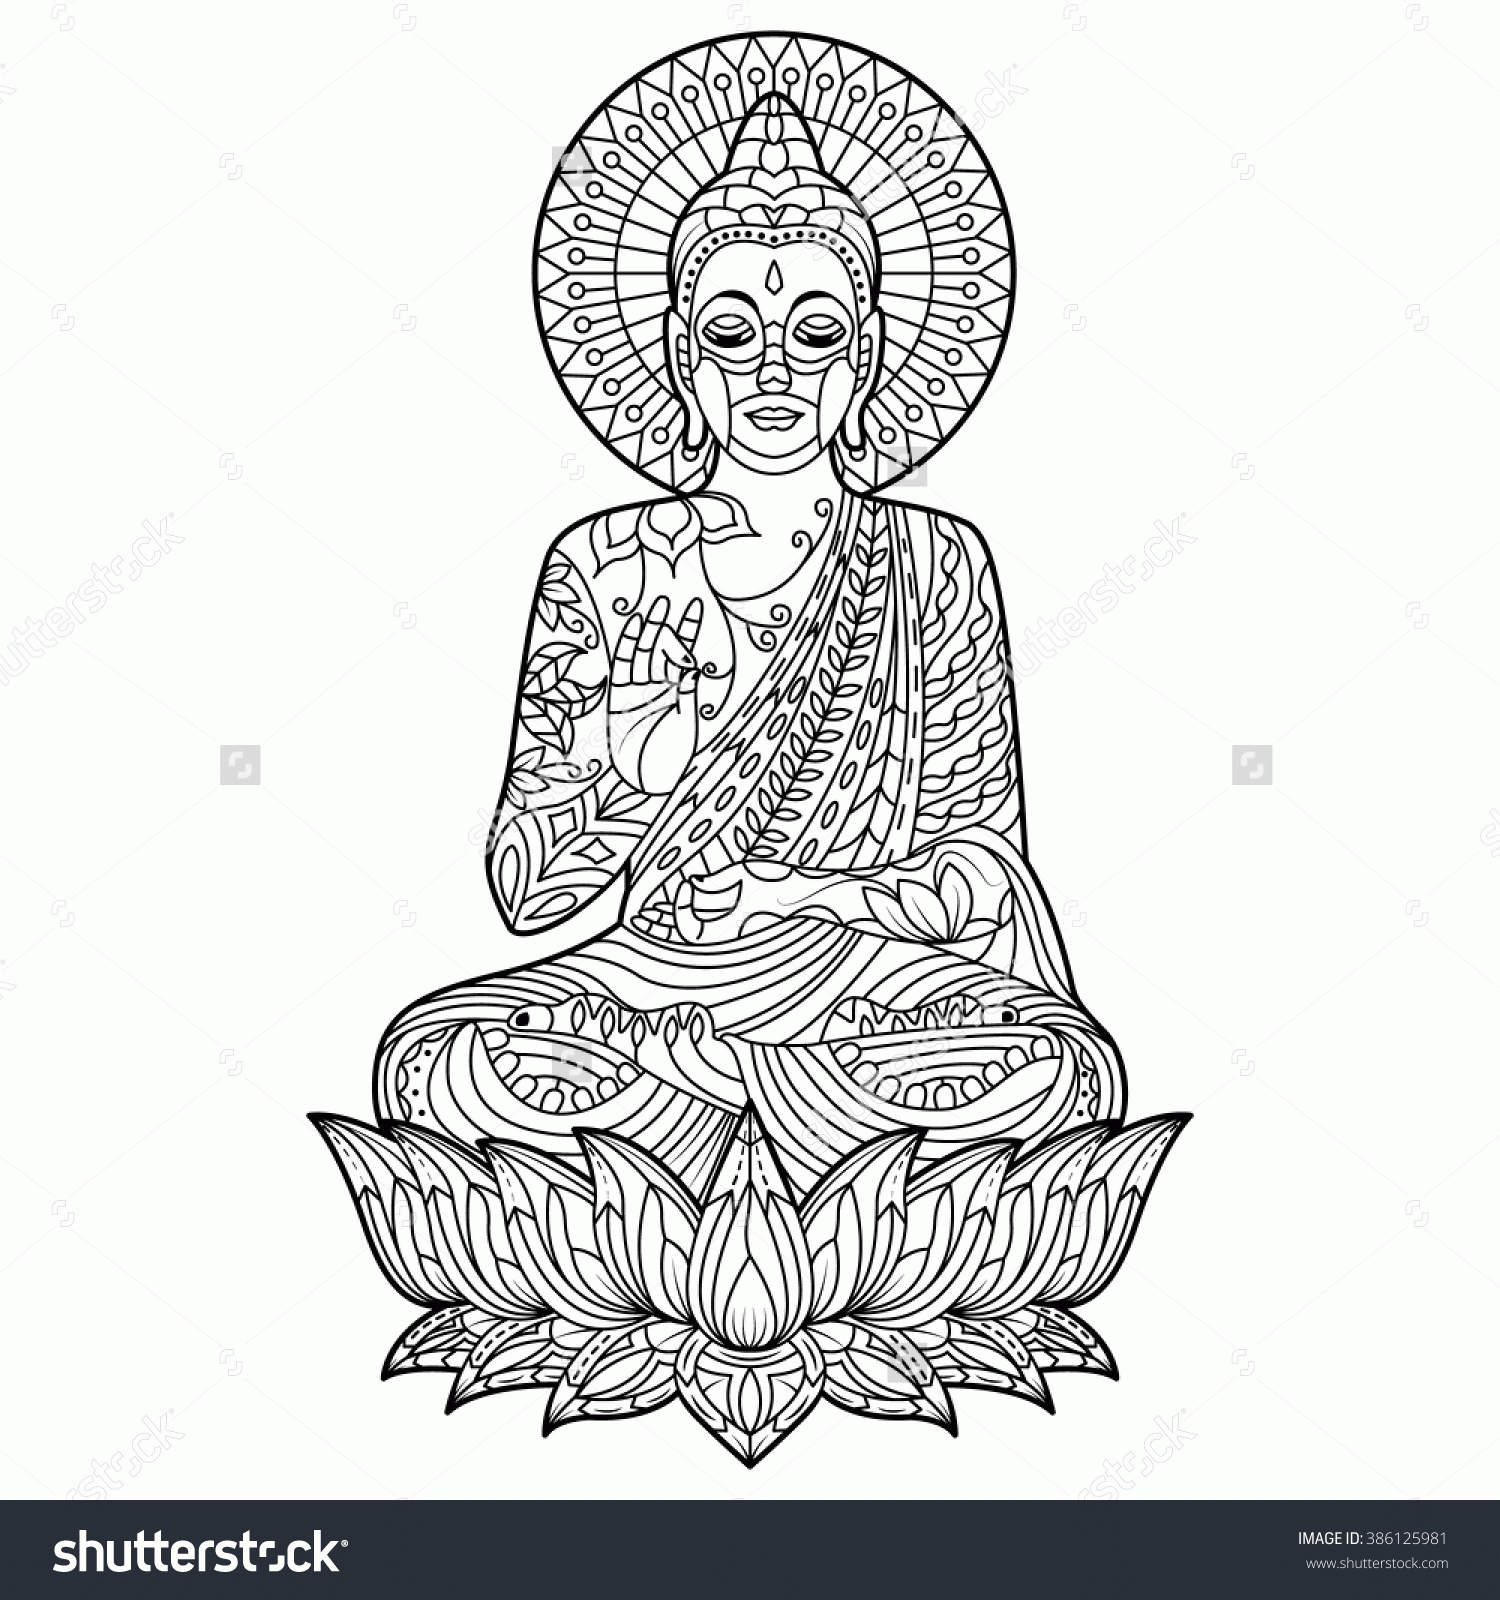 Buddhist - Coloring Pages for Kids and for Adults